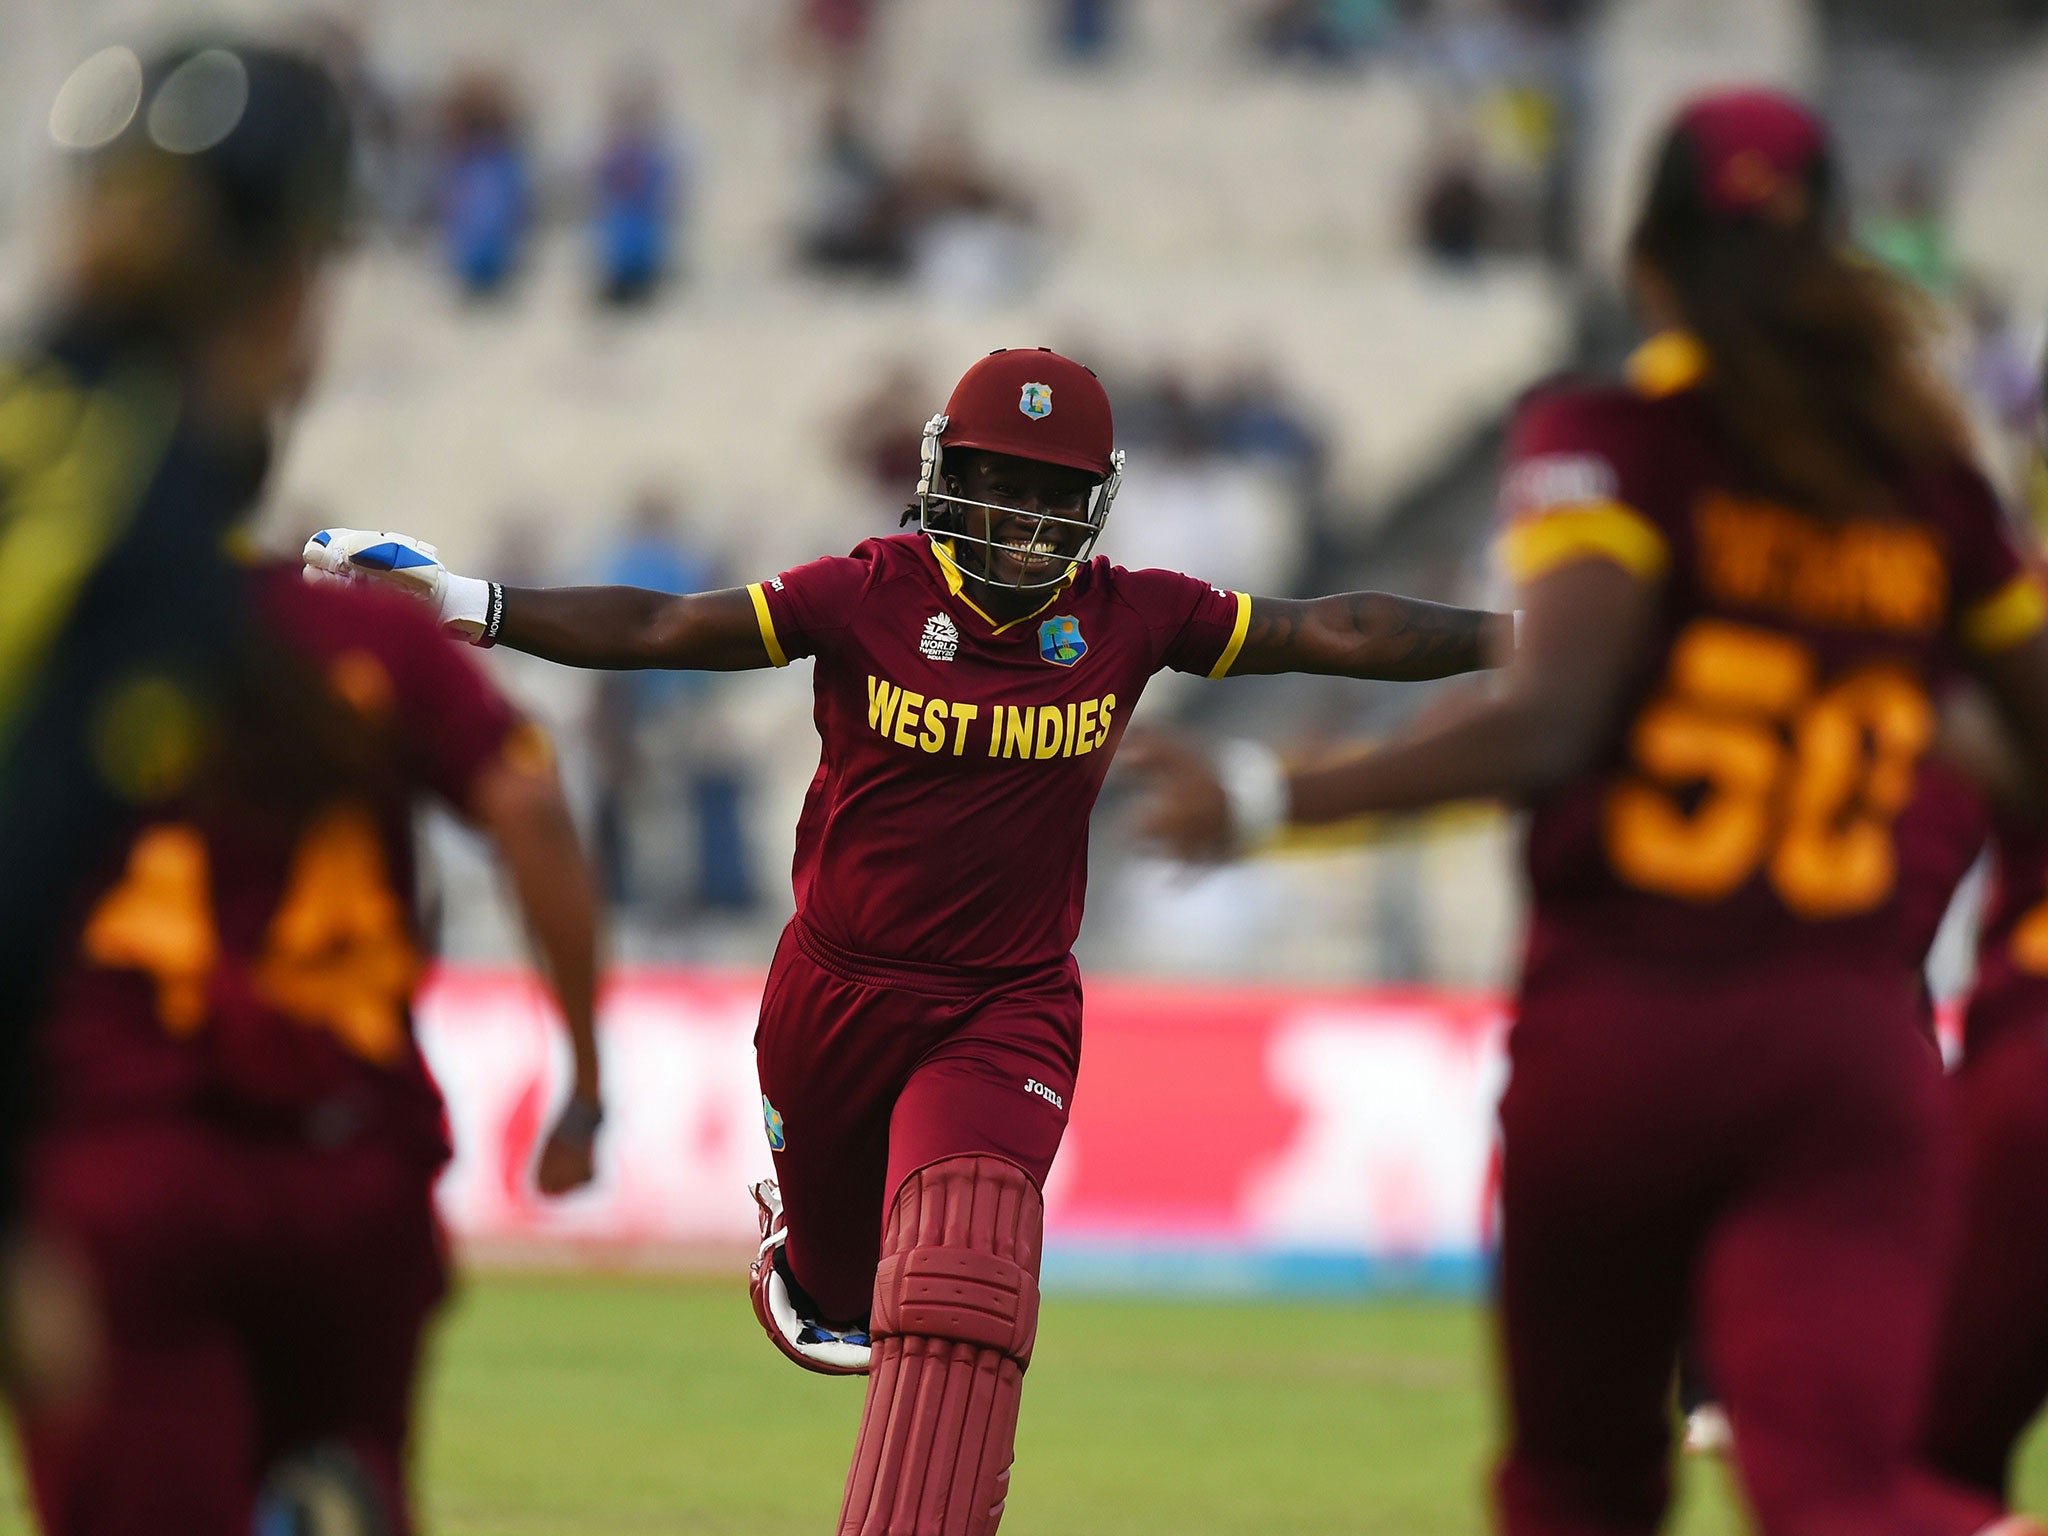 West Indies's Deandra Dottin runs towards her team-mates as she celebrates victory in the World T20 final